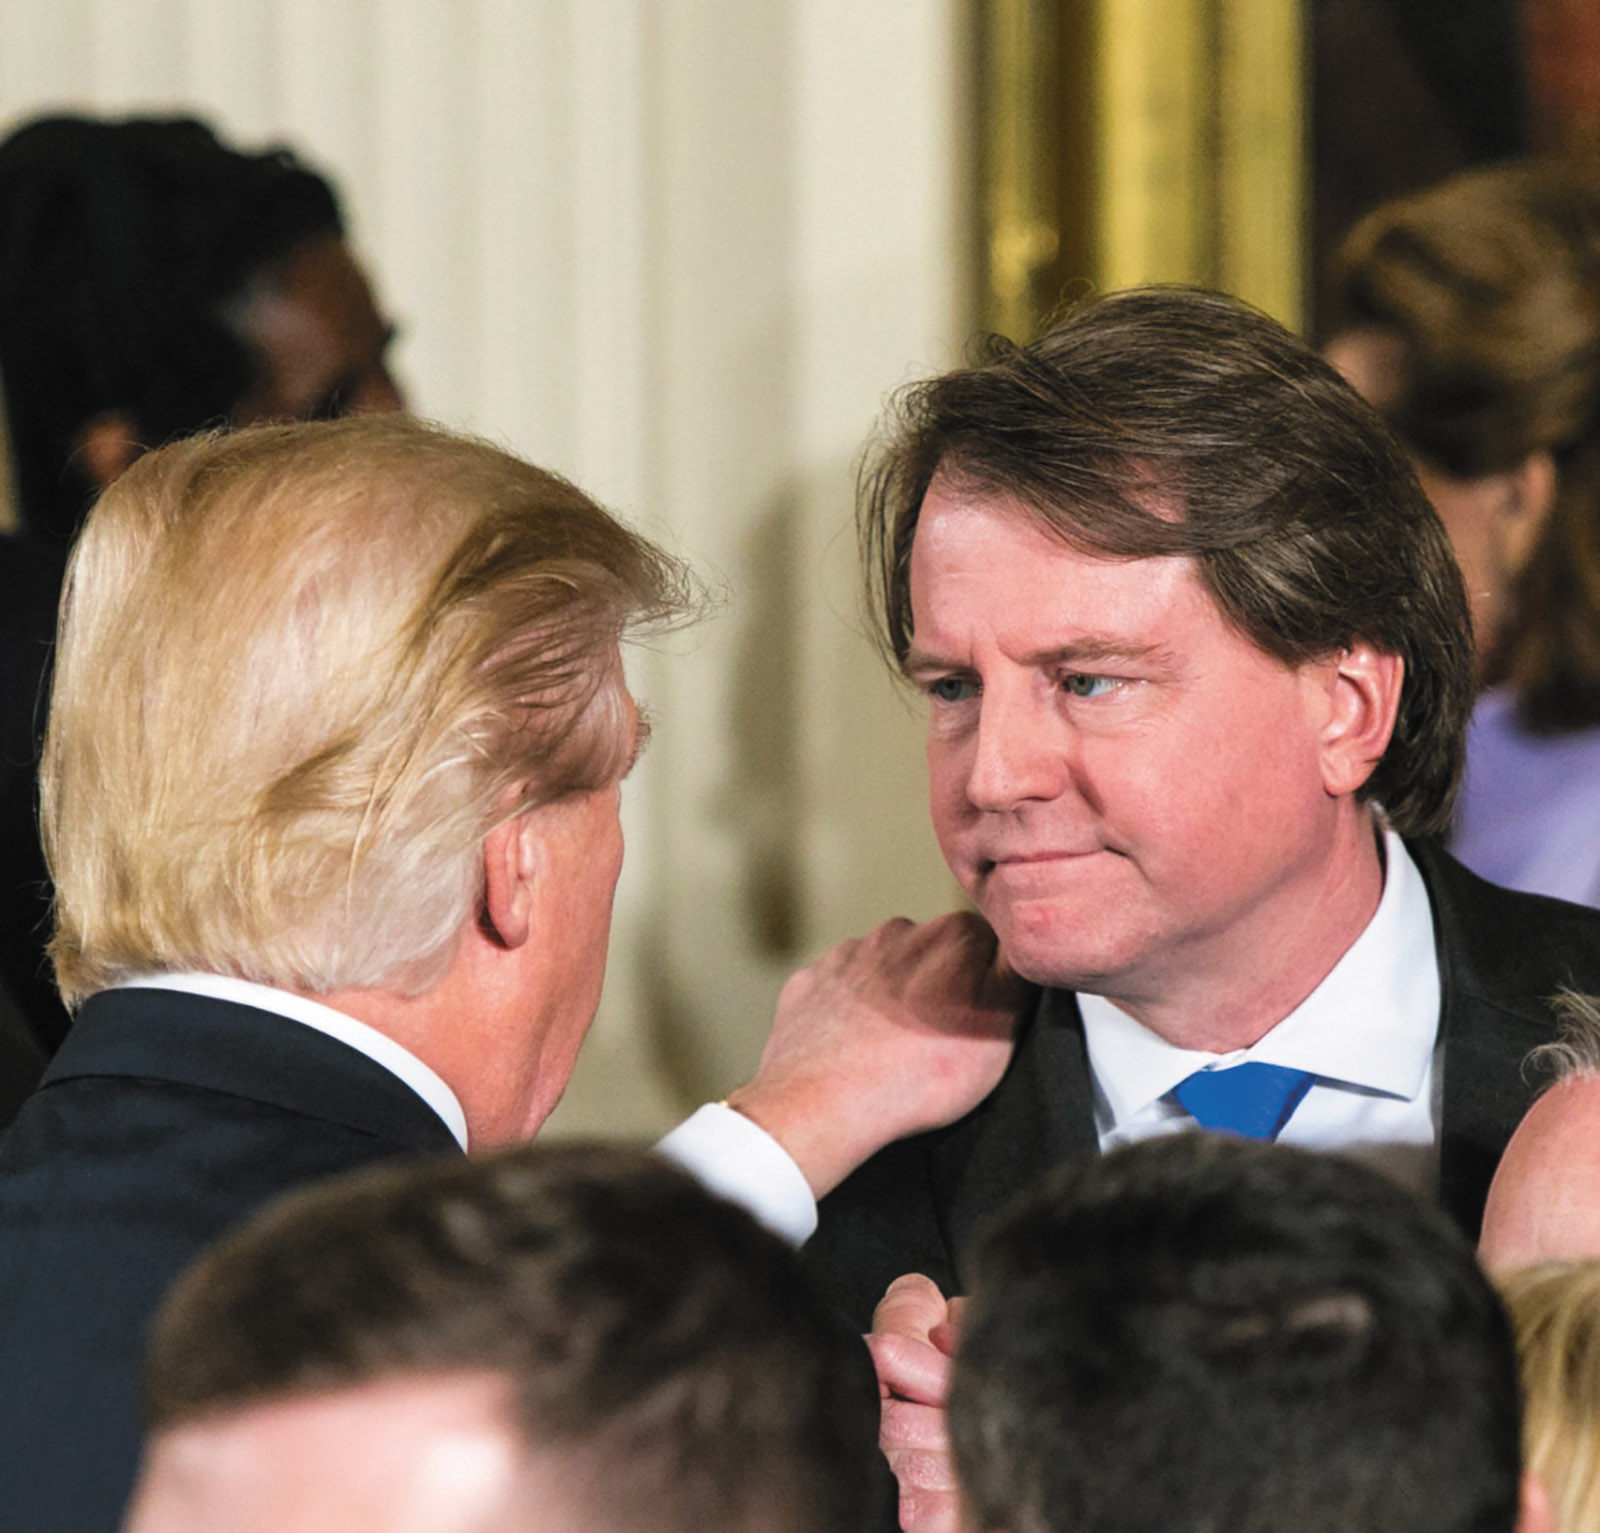 Trump and McGahn at the White House, January 2017